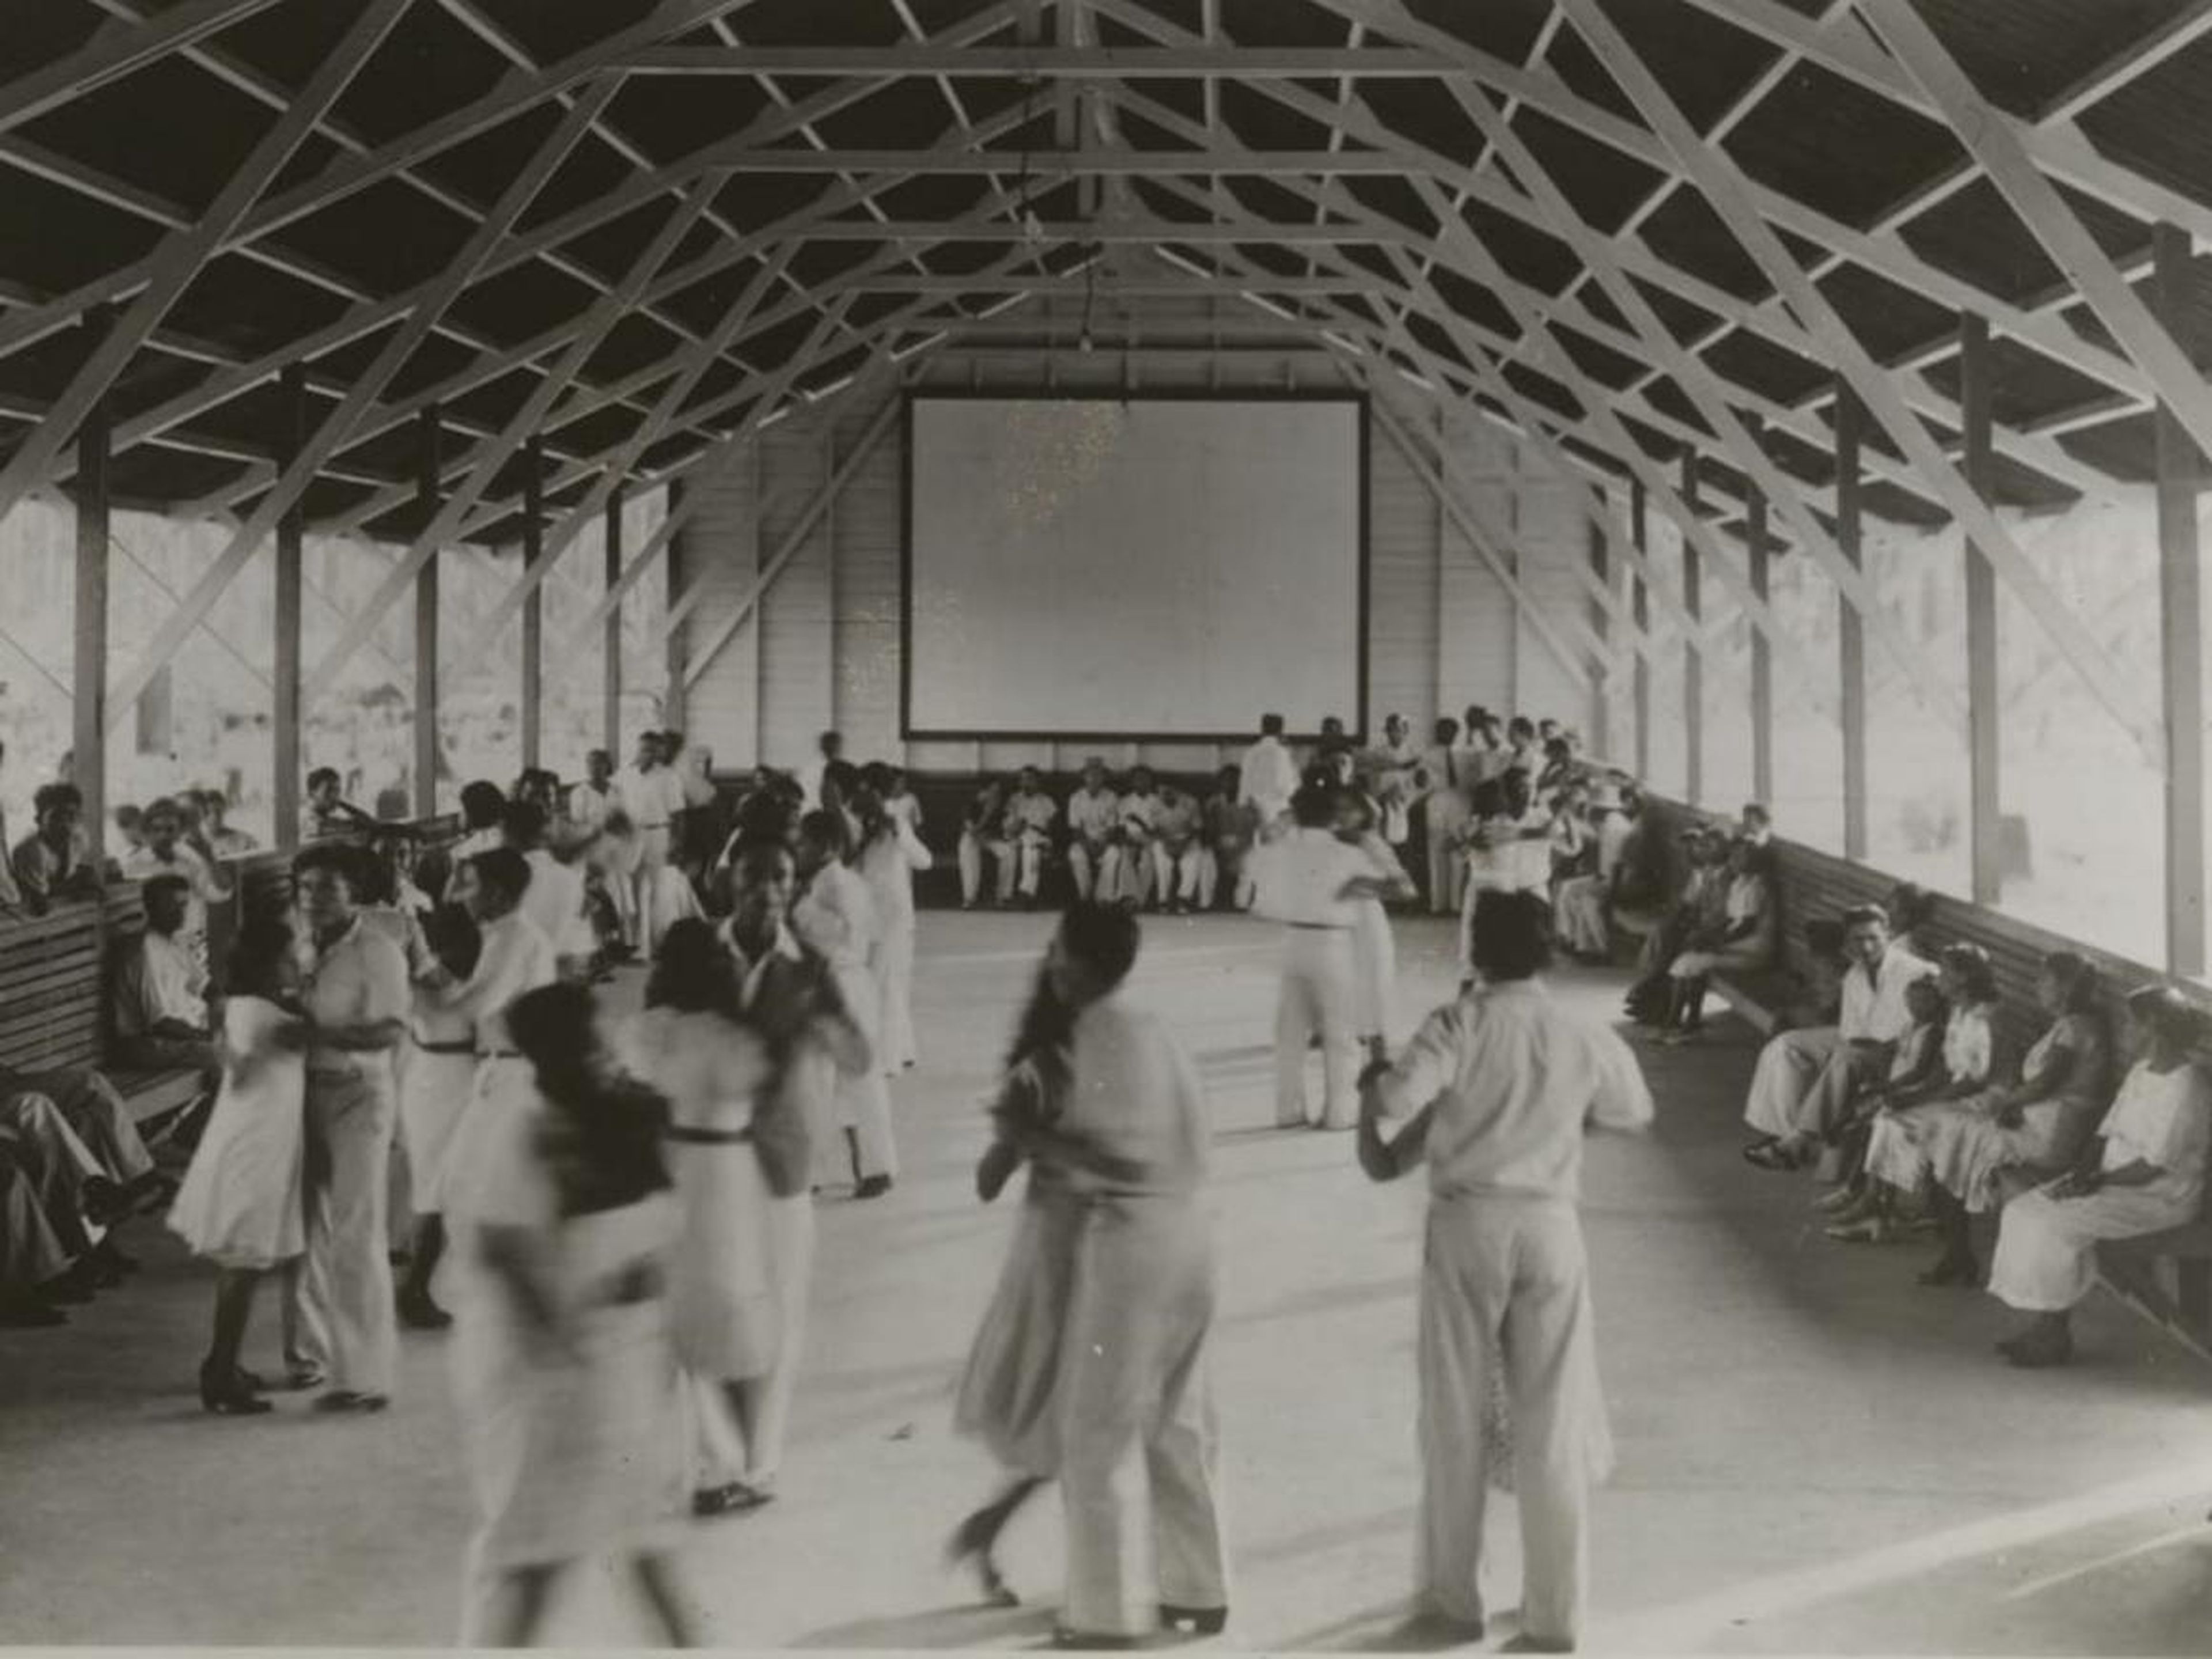 Ford also built a dance hall in hopes that his Brazilian workers would take to square dancing as much as he had.